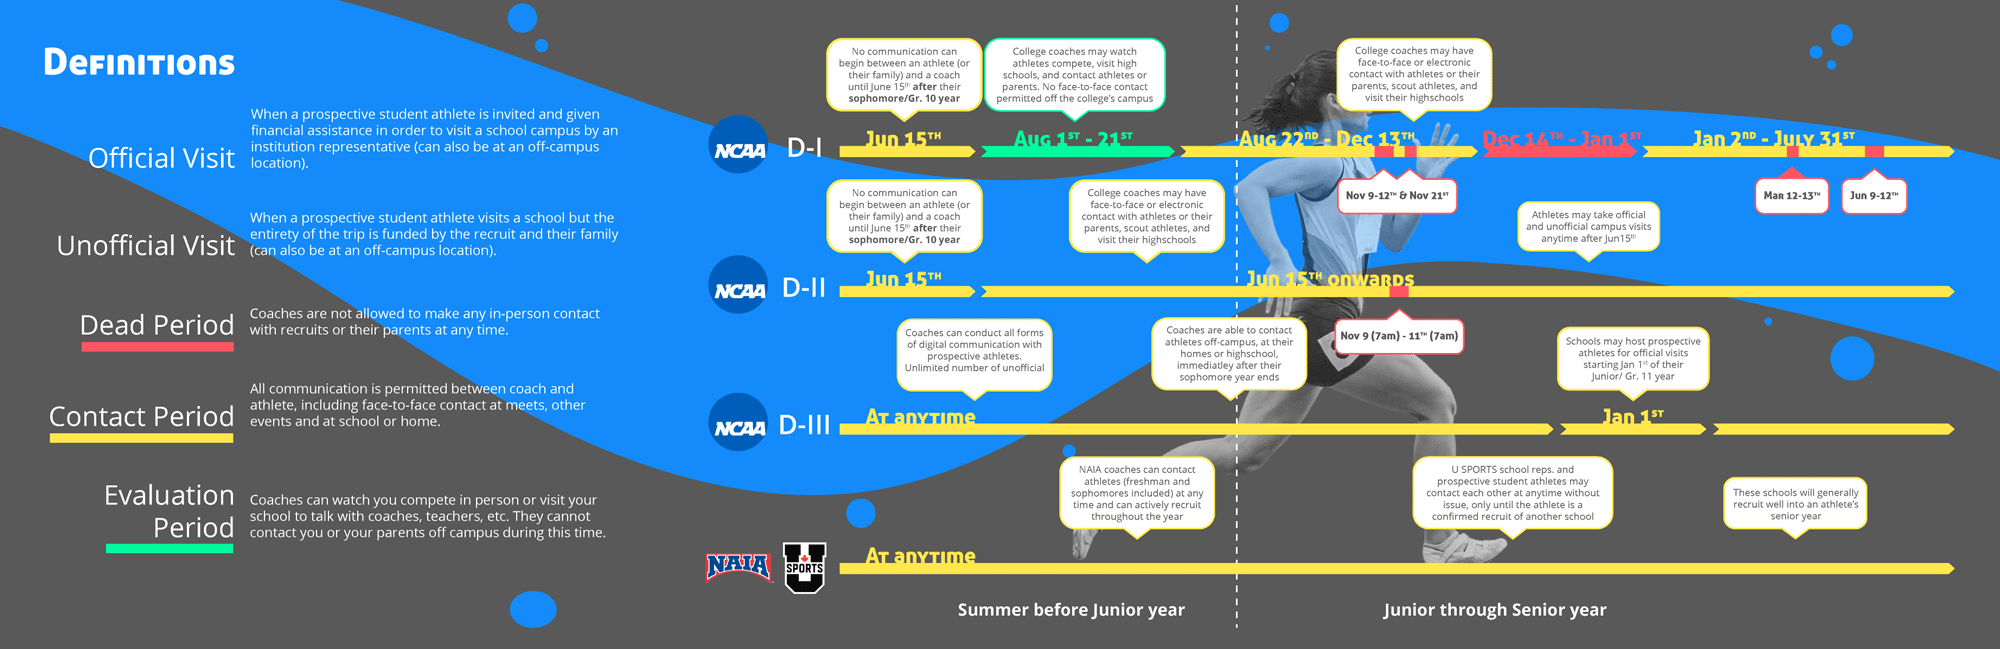 Recruitment timeline for track and field student-athletes: How to start your recruiting journey and when to do it